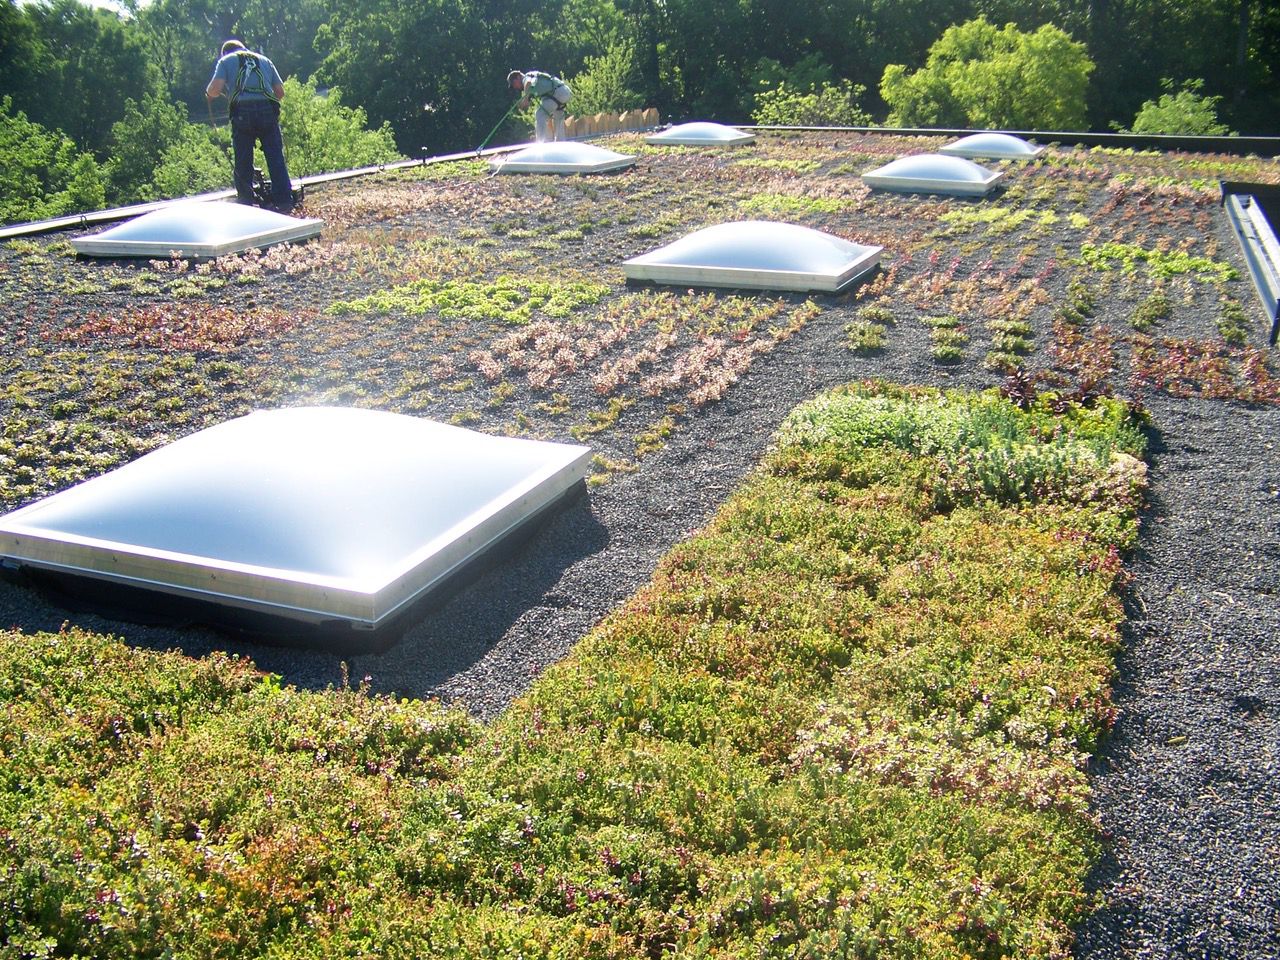 A 'green' roof at the Cincinnati Zoo and Botanical Garden features a variety of plans. (Photo courtesy of Cincinnati Zoo and Botanical Garden)